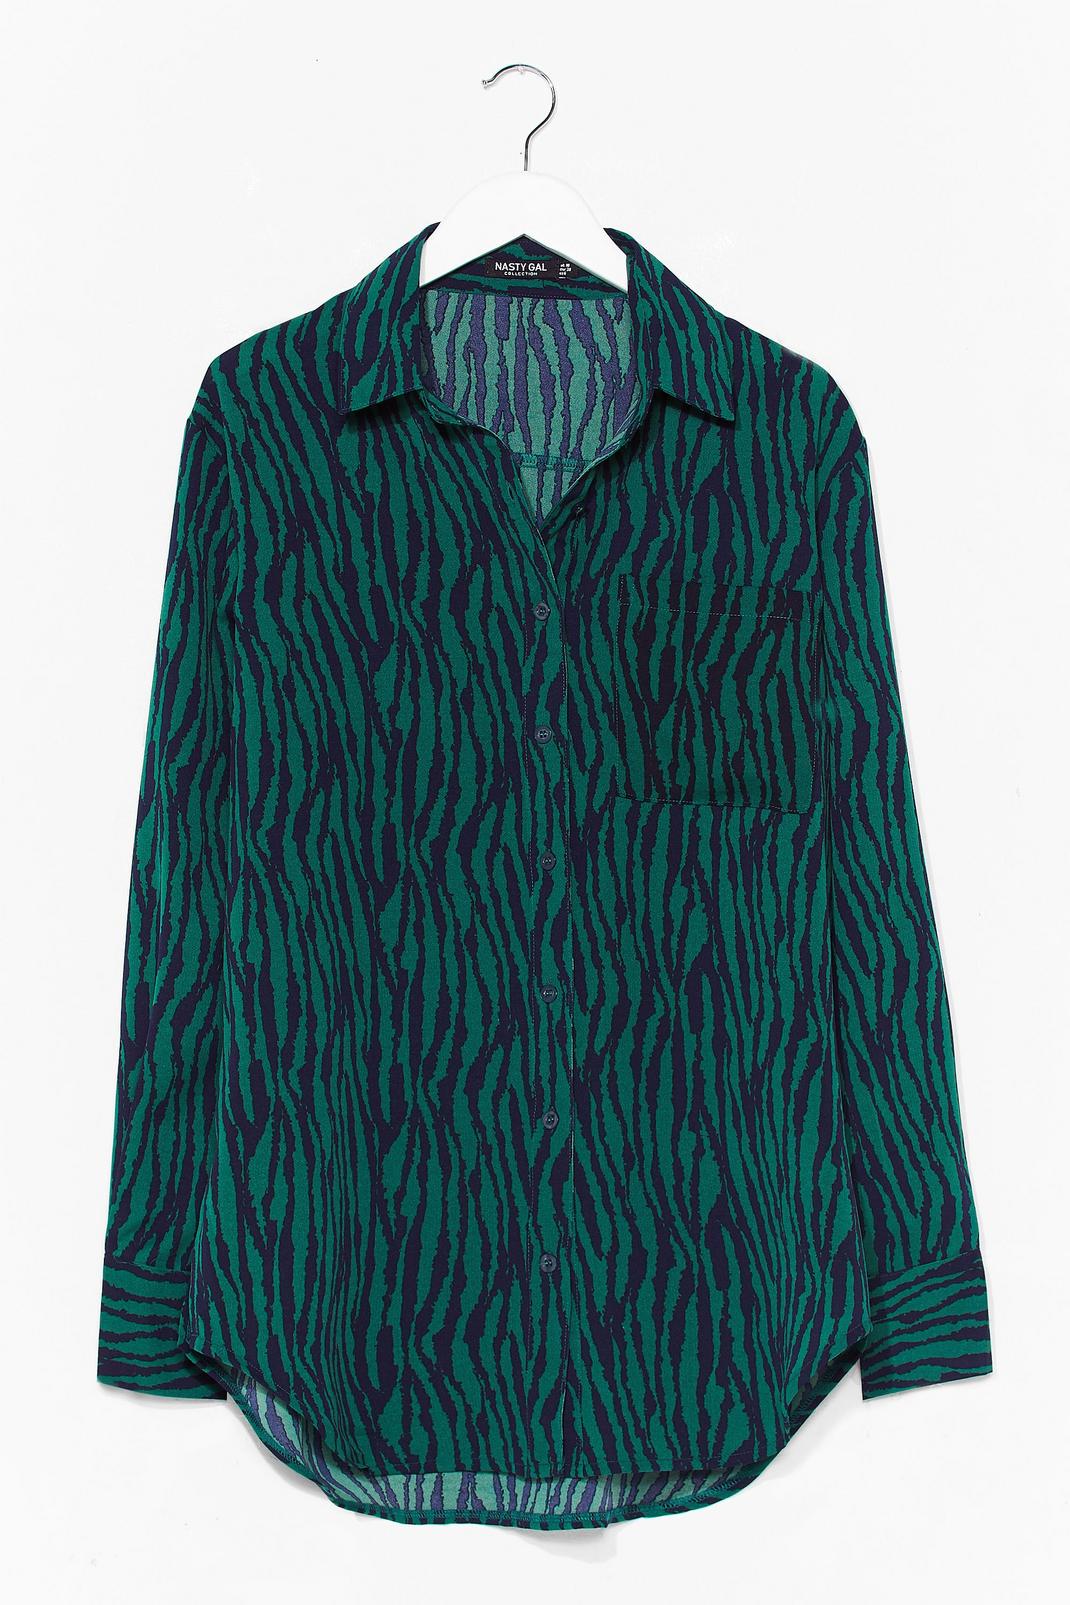 Green That Print in Your Eye Zebra Shirt image number 1